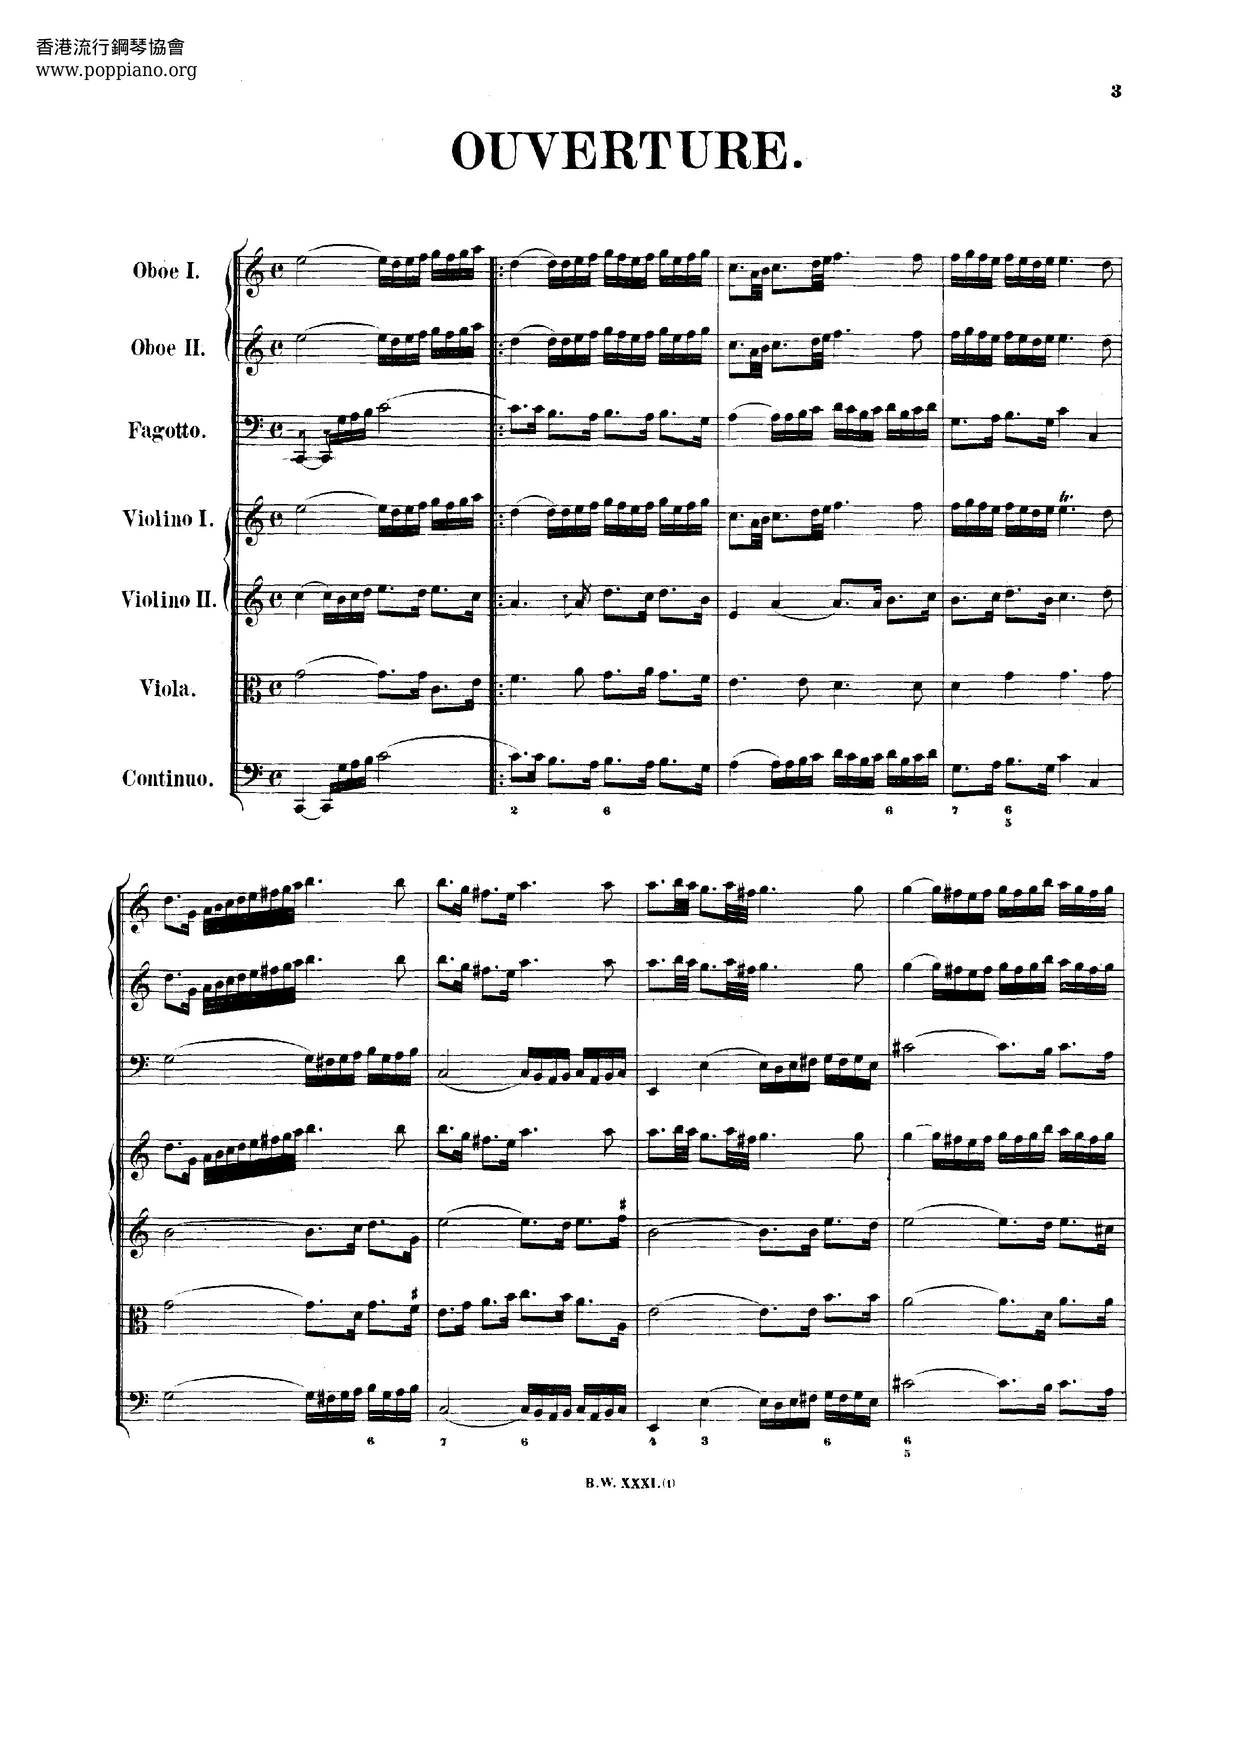 Orchestral Suite No. 1 In C Major, BWV 1066 Score